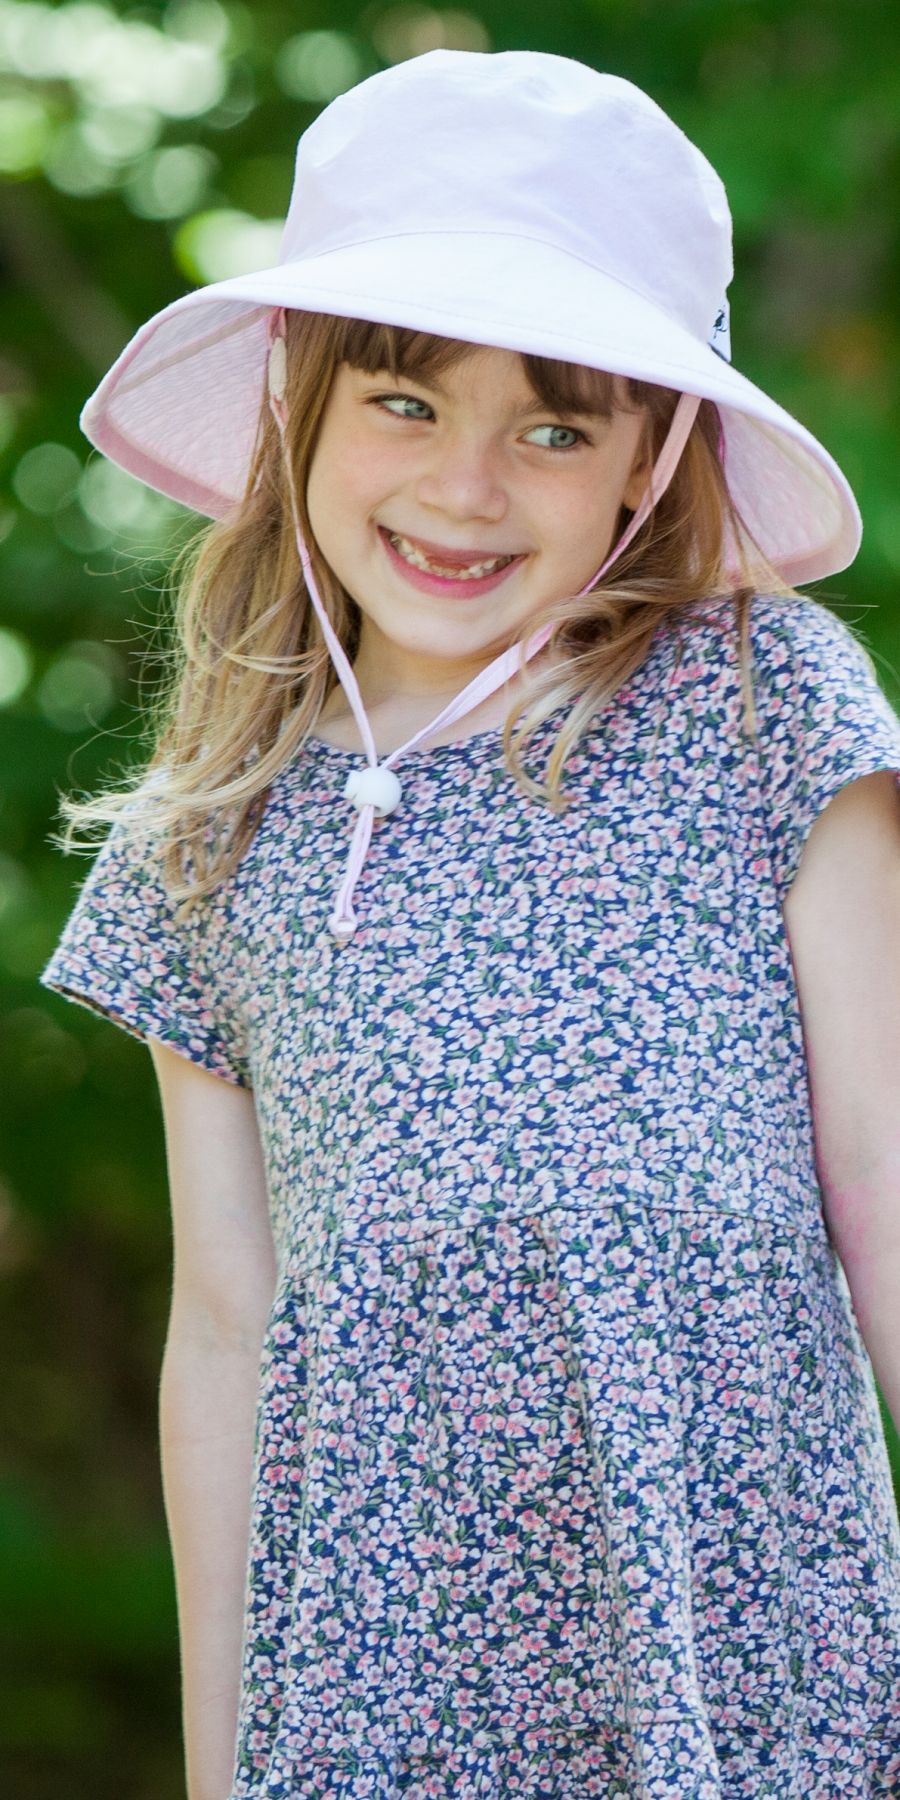 Kids UPF50 Wide Brim Sunbaby Hat with UPF50 Excellent Sun Protection Rating.  This means it blocks at least 97.5% UVA and UVB radiation.  Prewashed, Machine Washable. Made in Canada by Puffin Gear